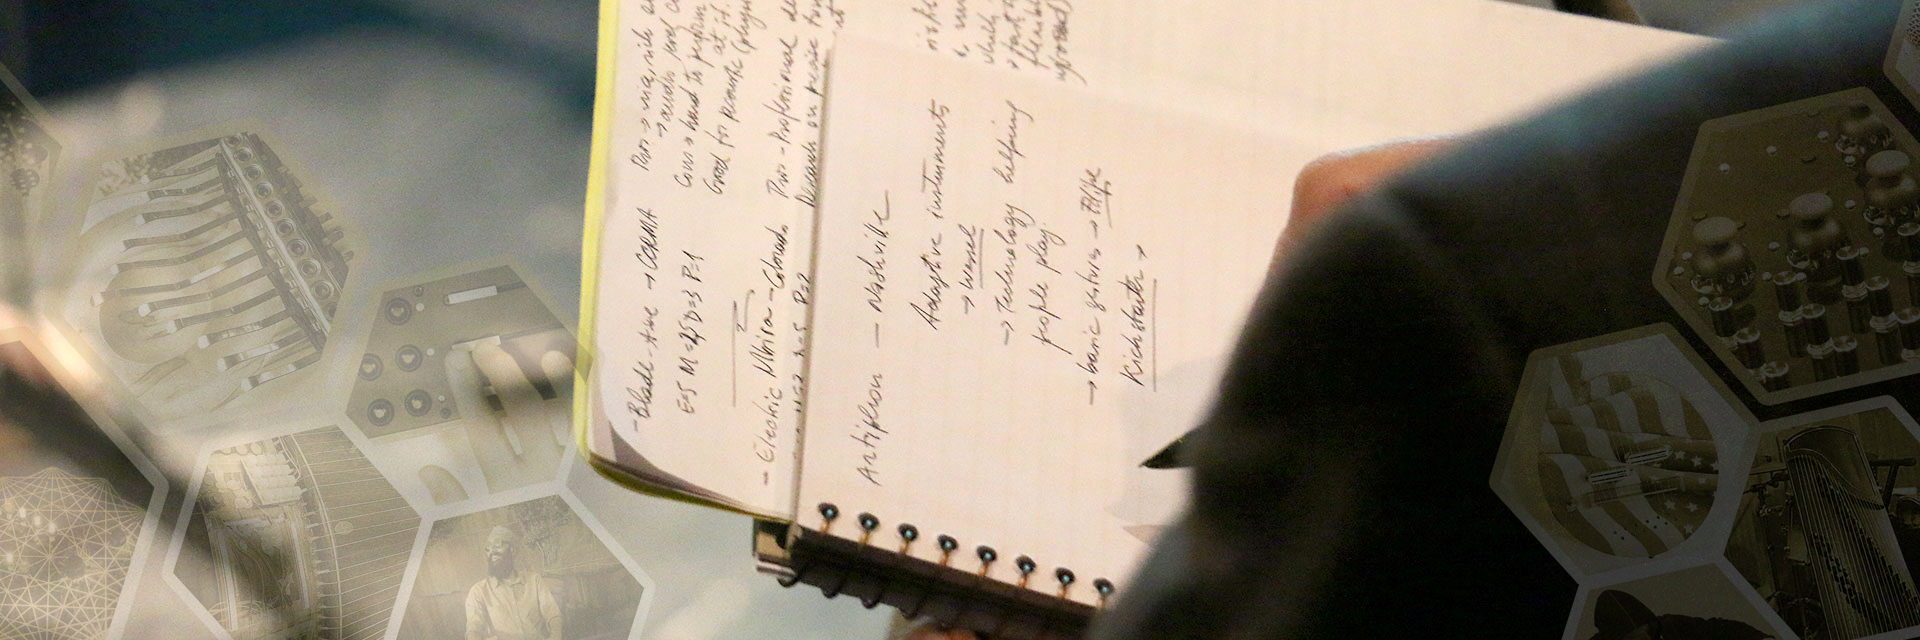 A photo of a Guthman judge's note pad, taken from behind his shoulder as he writes.